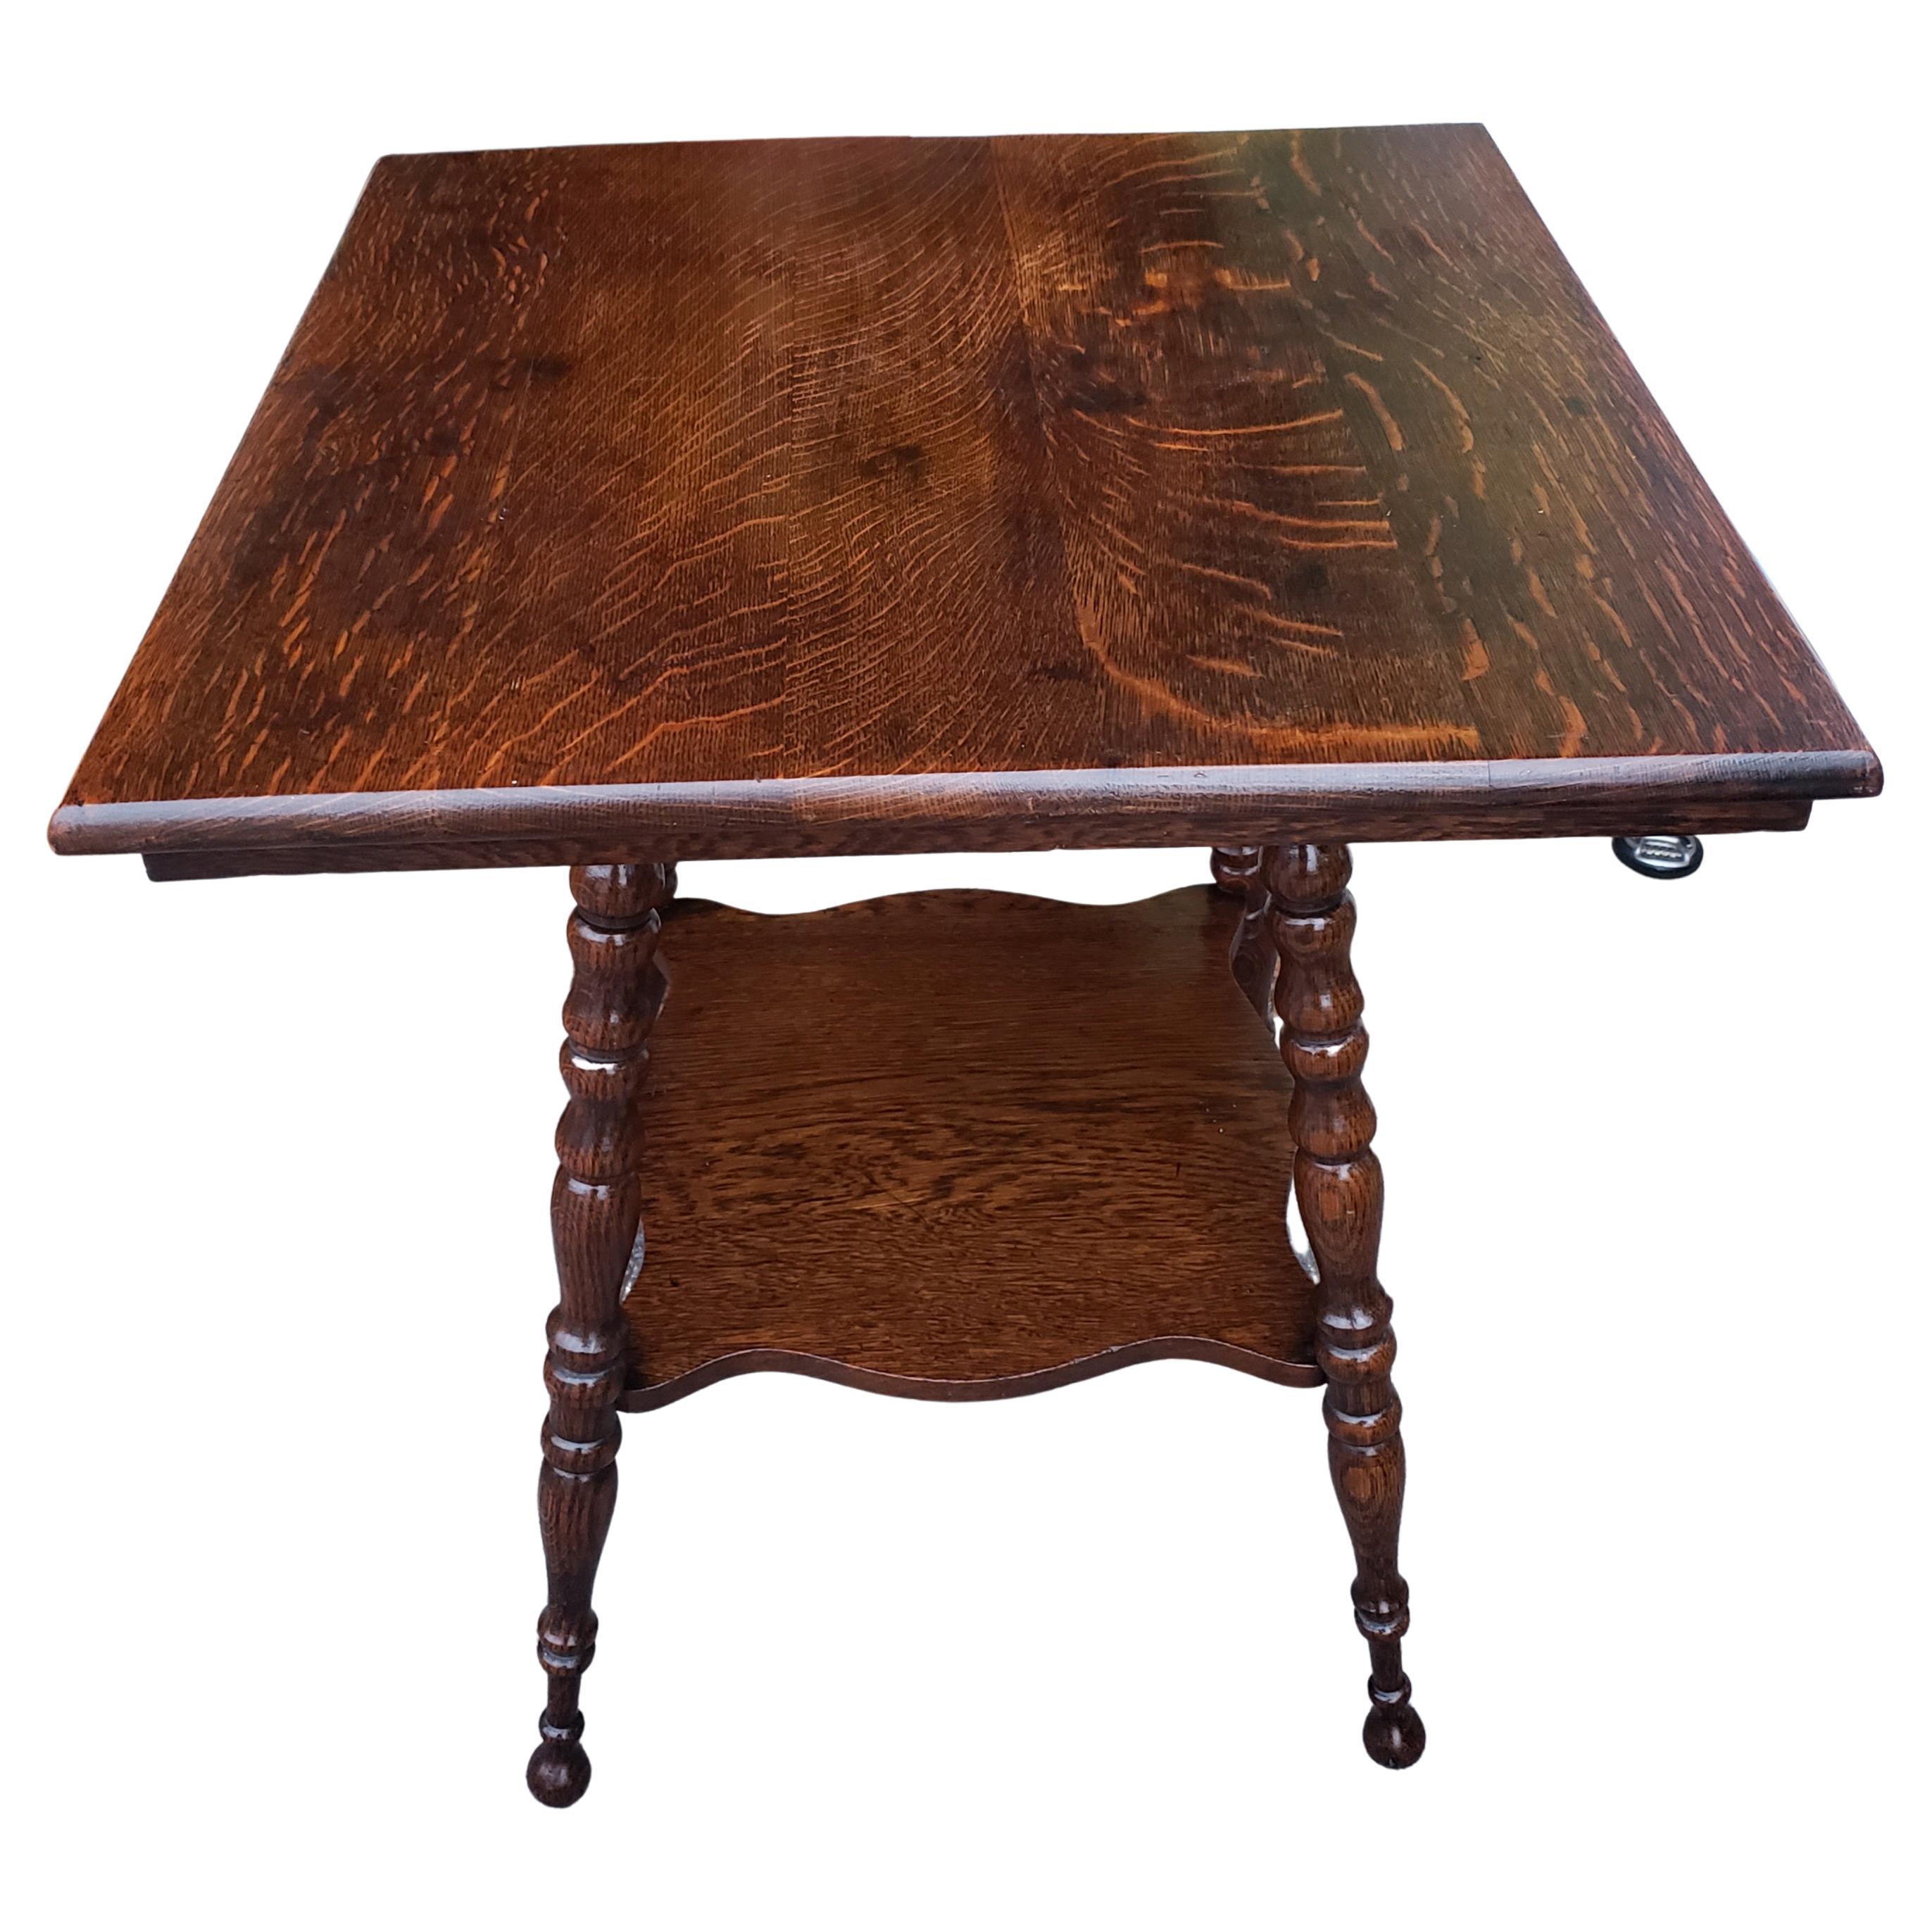 1940s mid-century square quarter sawn tiger oak two-tier parlor table bobbin legs
Good Condition,Solid and Firm.
Vintage Piece with normal signs of wear, this is what gives its character and confirms its age.
Beautiful coloring in the wood grain.